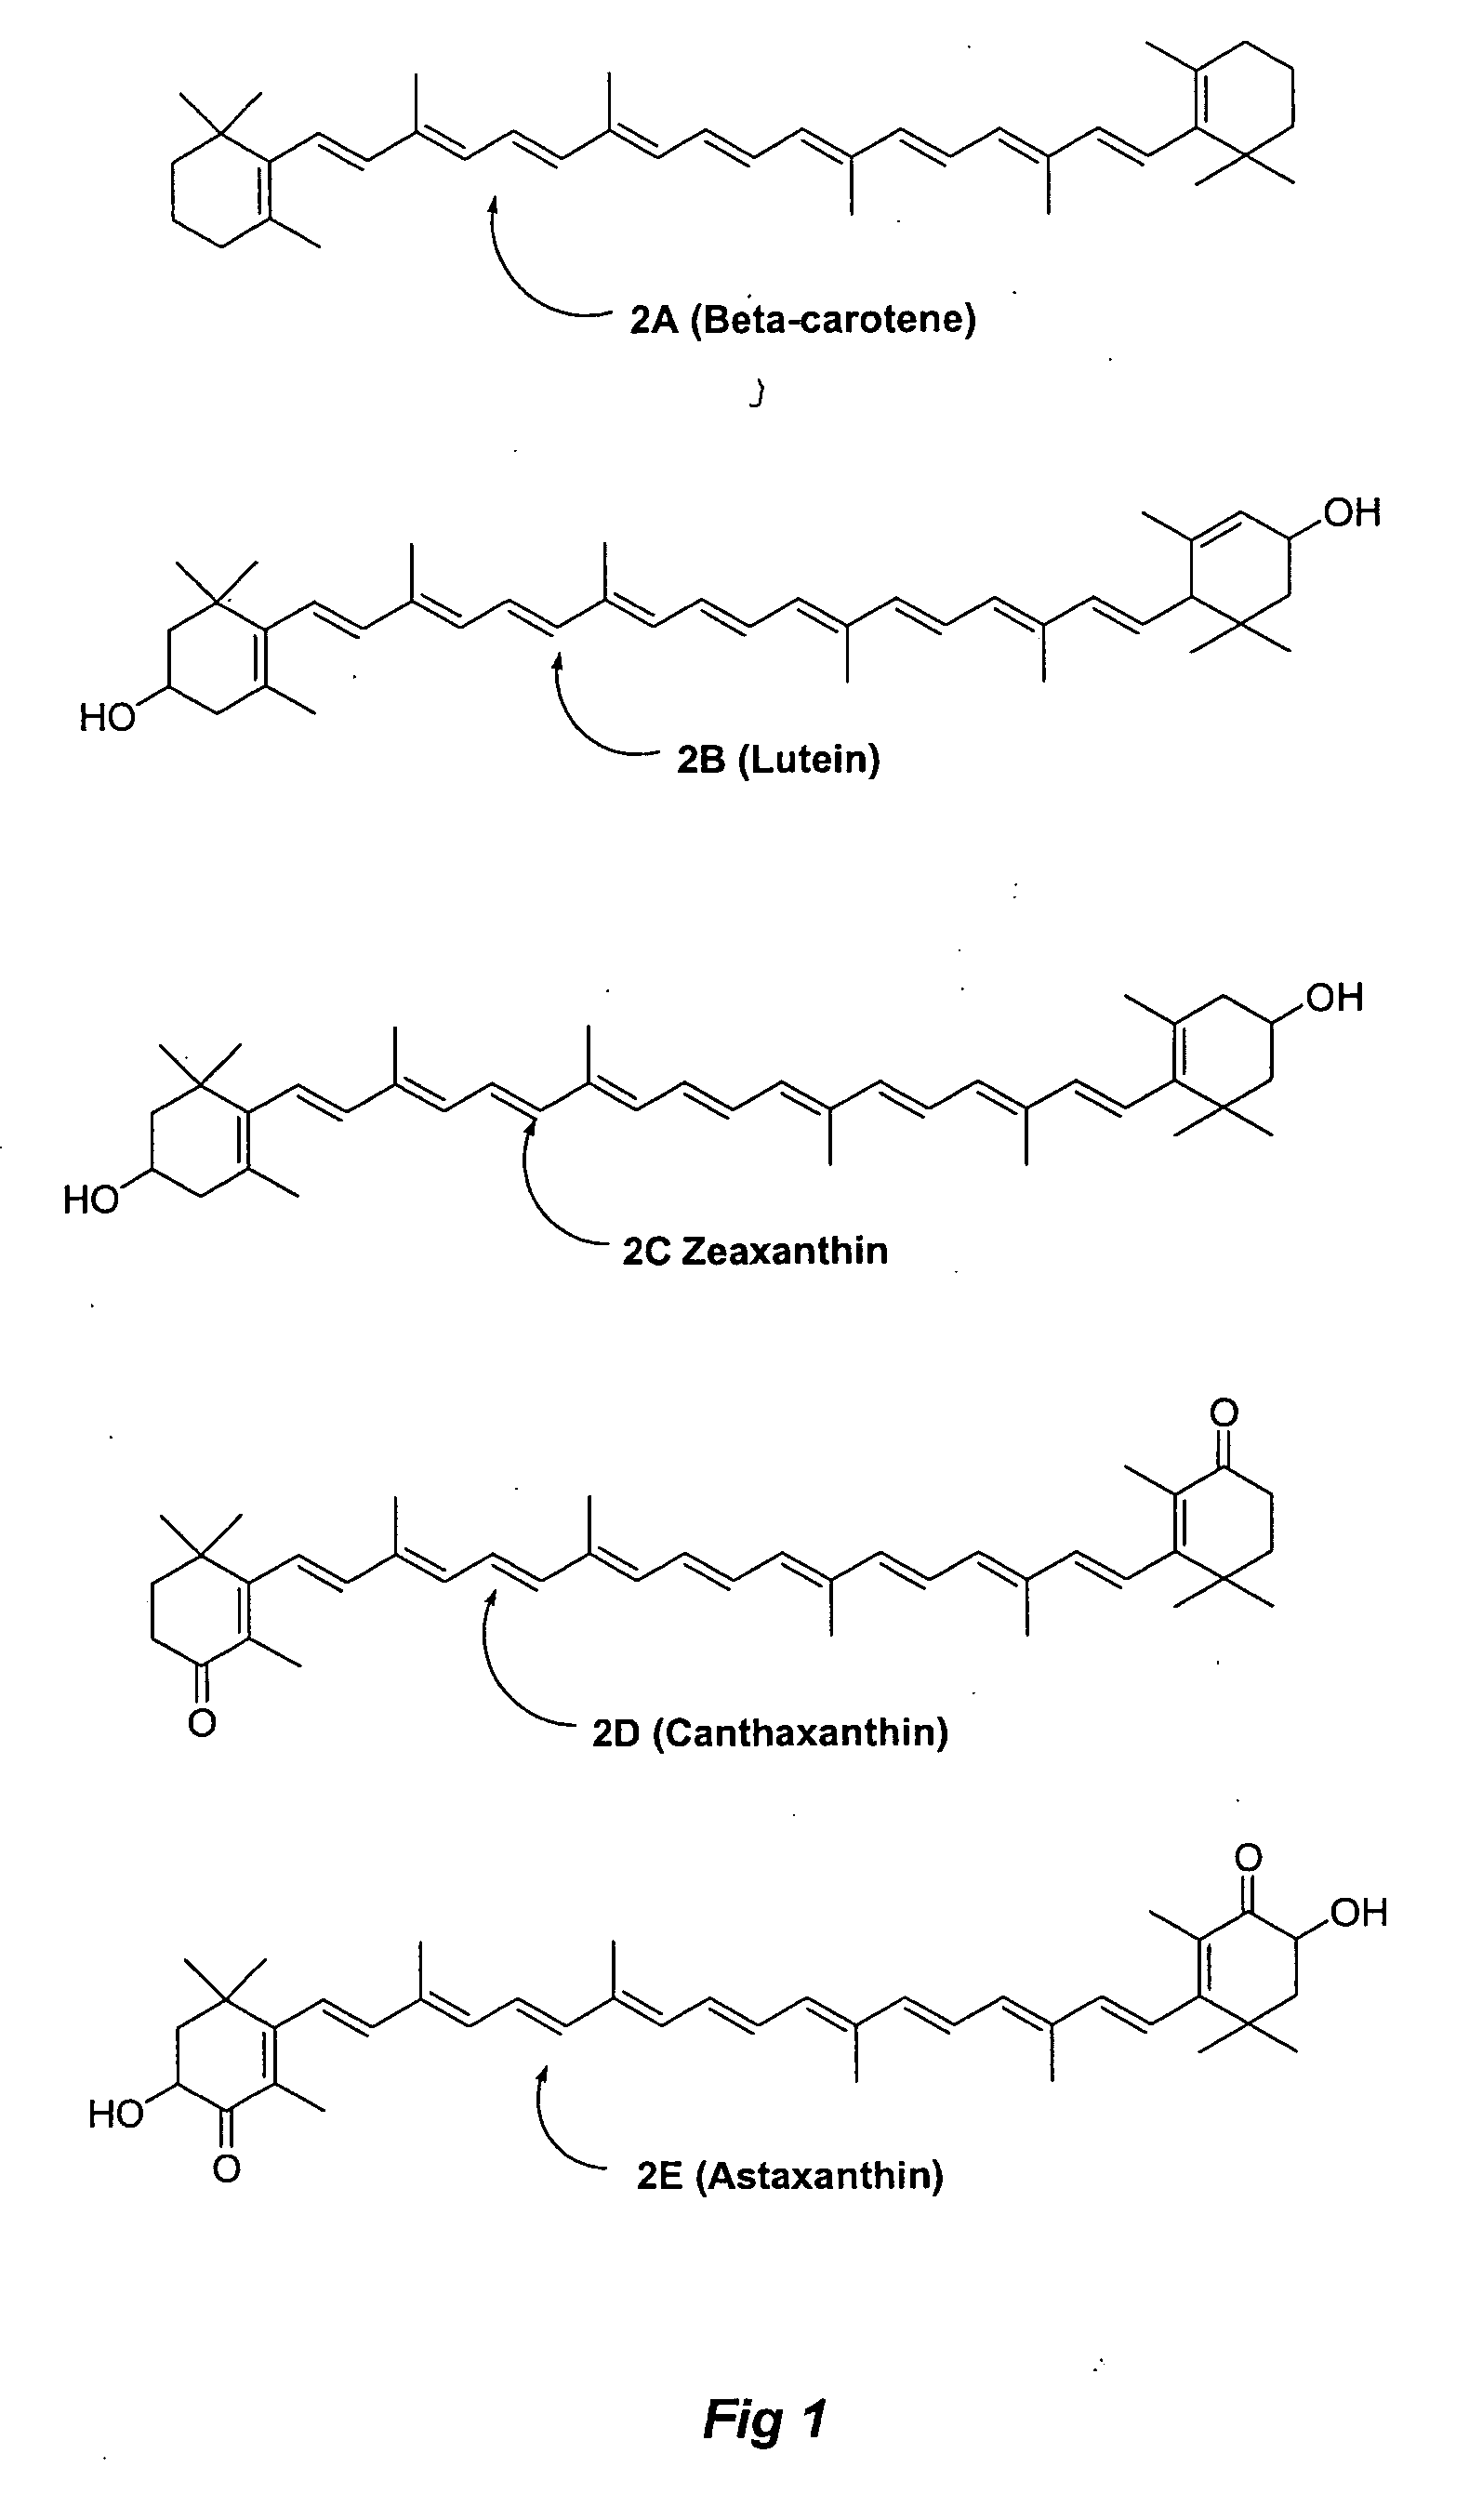 Methods for the synthesis of zeazanthin